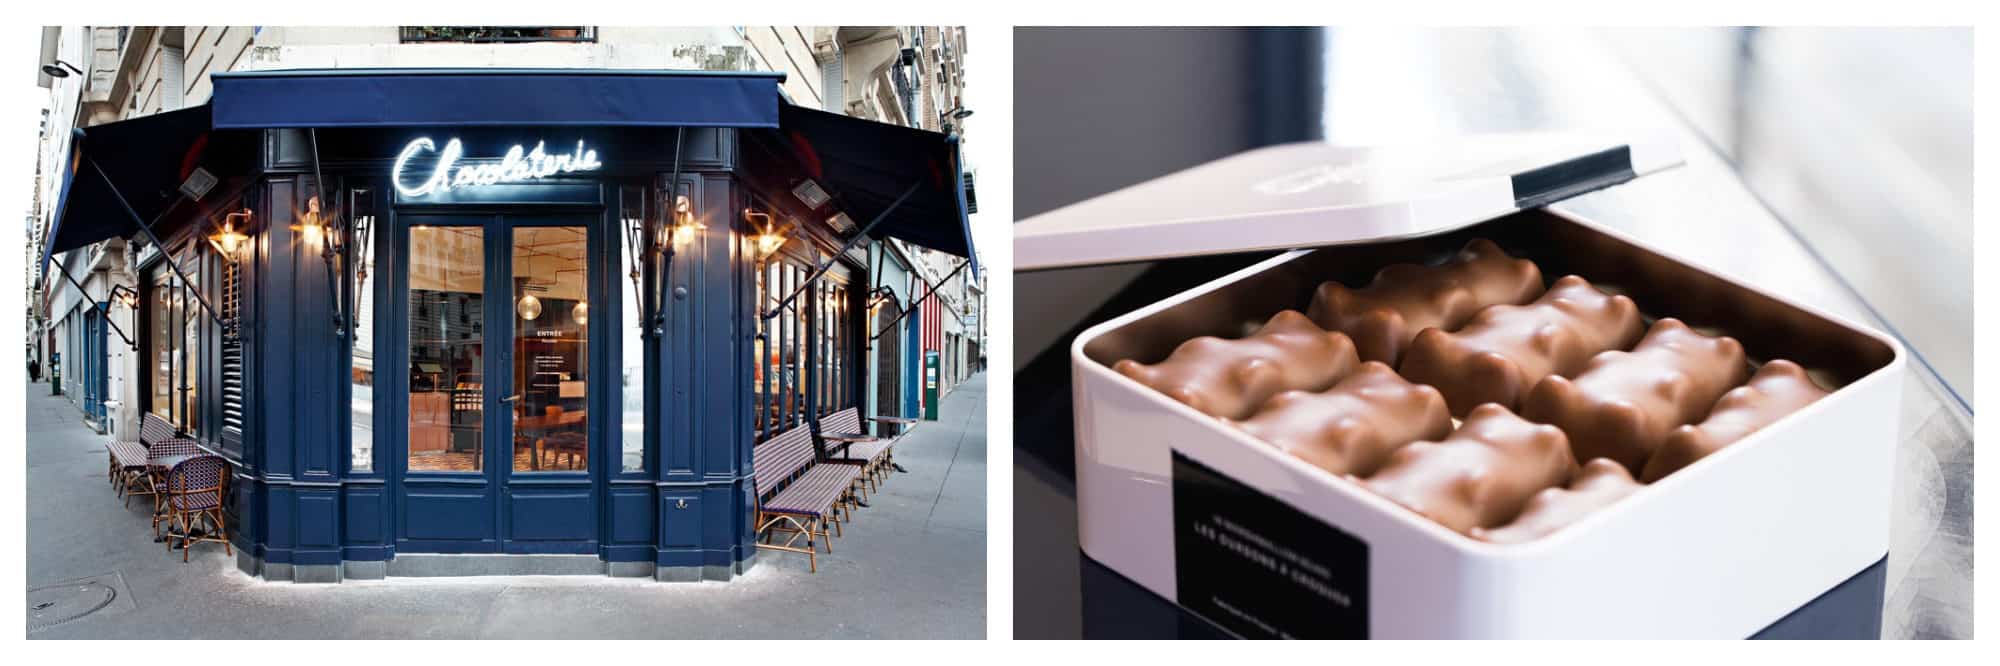 La Chocolaterie's blue exterior with neon sign in Paris 11 (left). Chocolate bears in a box (right).